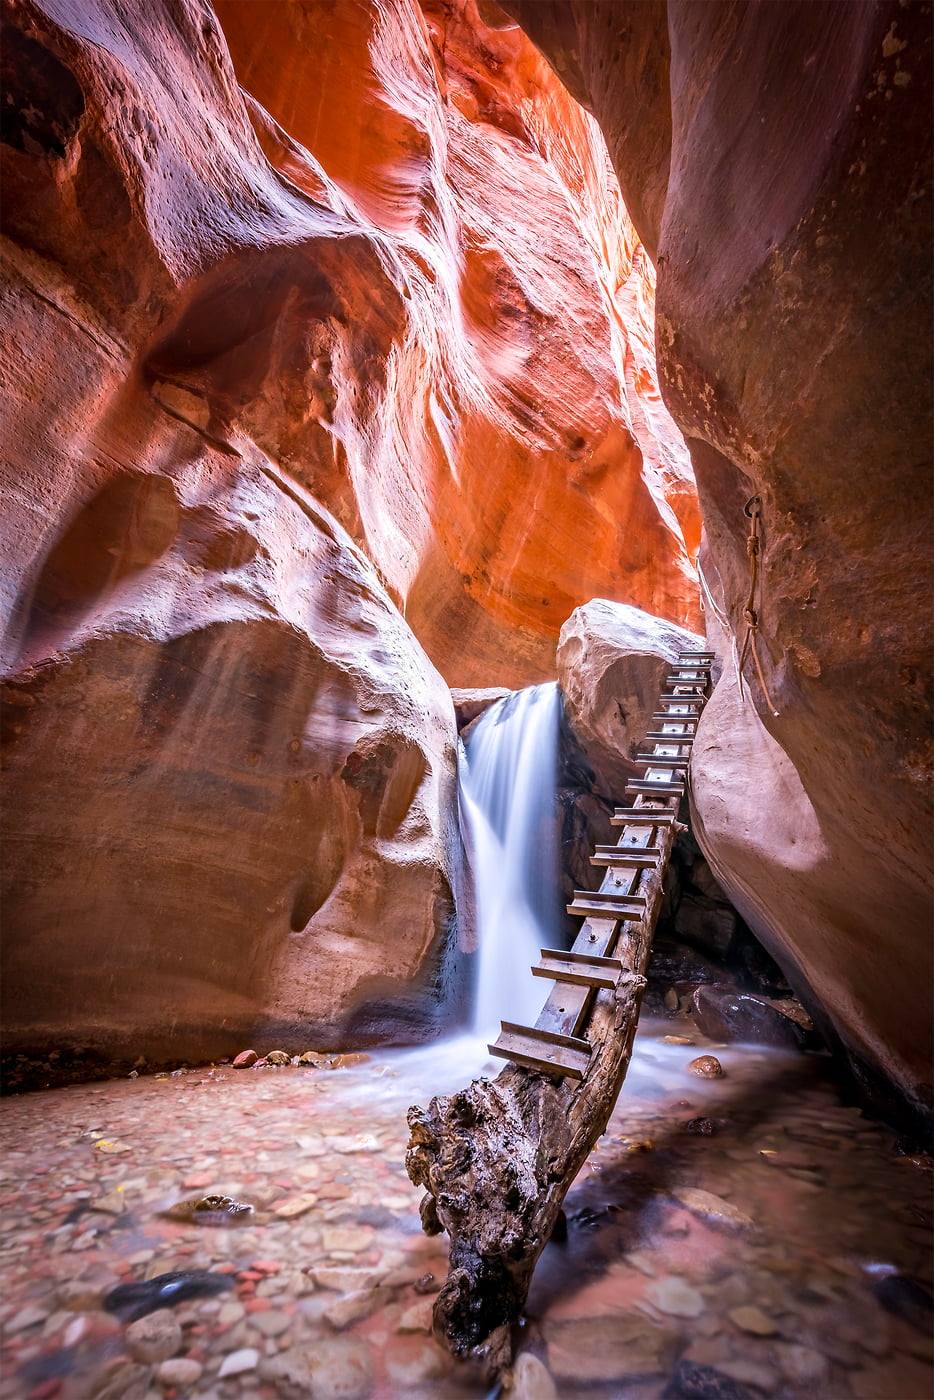 200 megapixels! A very high resolution, large-format VAST photo print of a waterfall, canyon, and ladder in Zion National Park; photo created by Justin Katz in Utah.